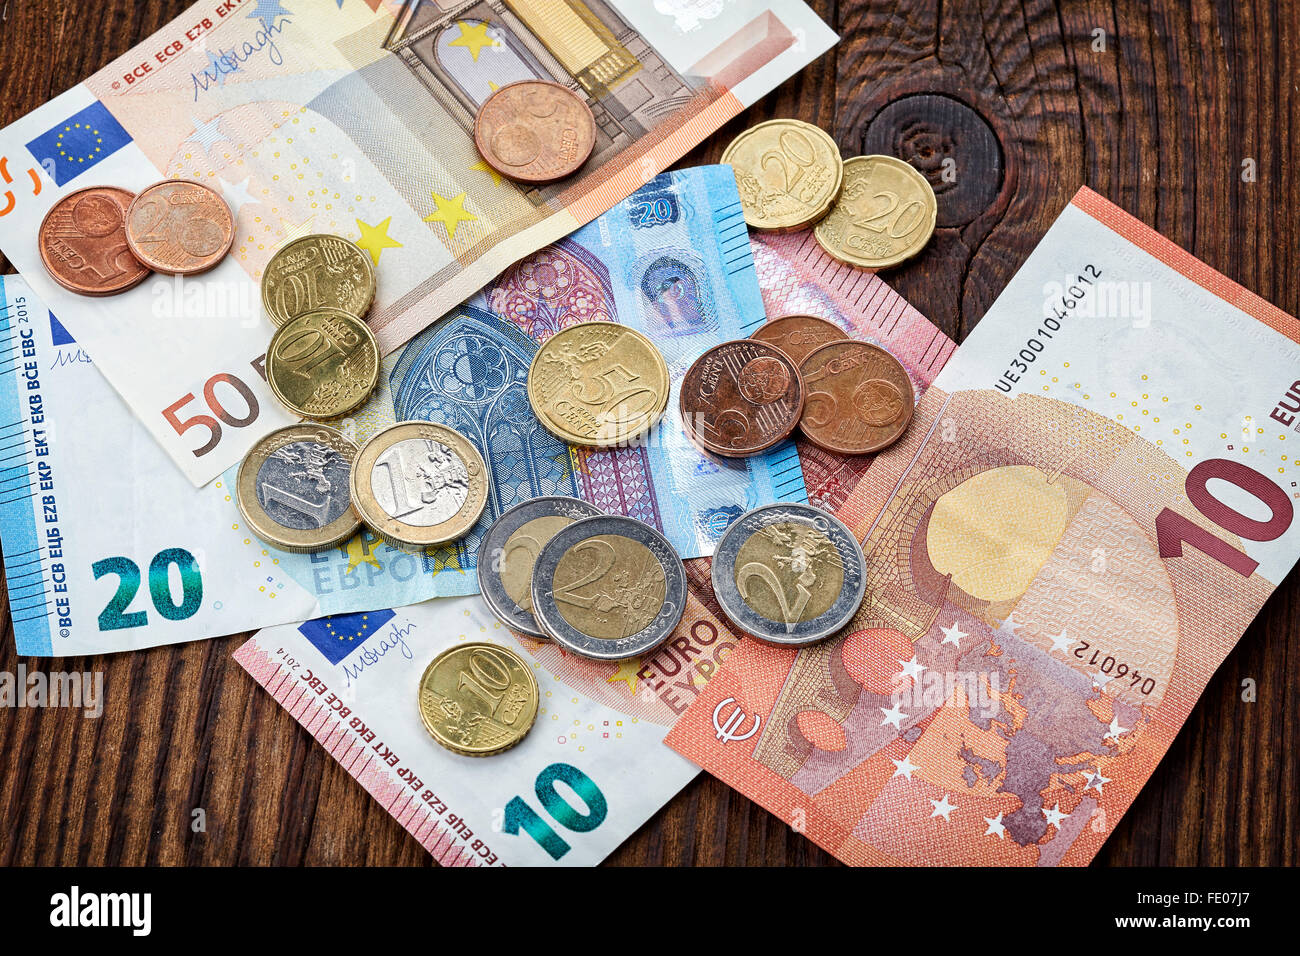 Money Euro banknotes and coins on wooden table, top view Stock Photo